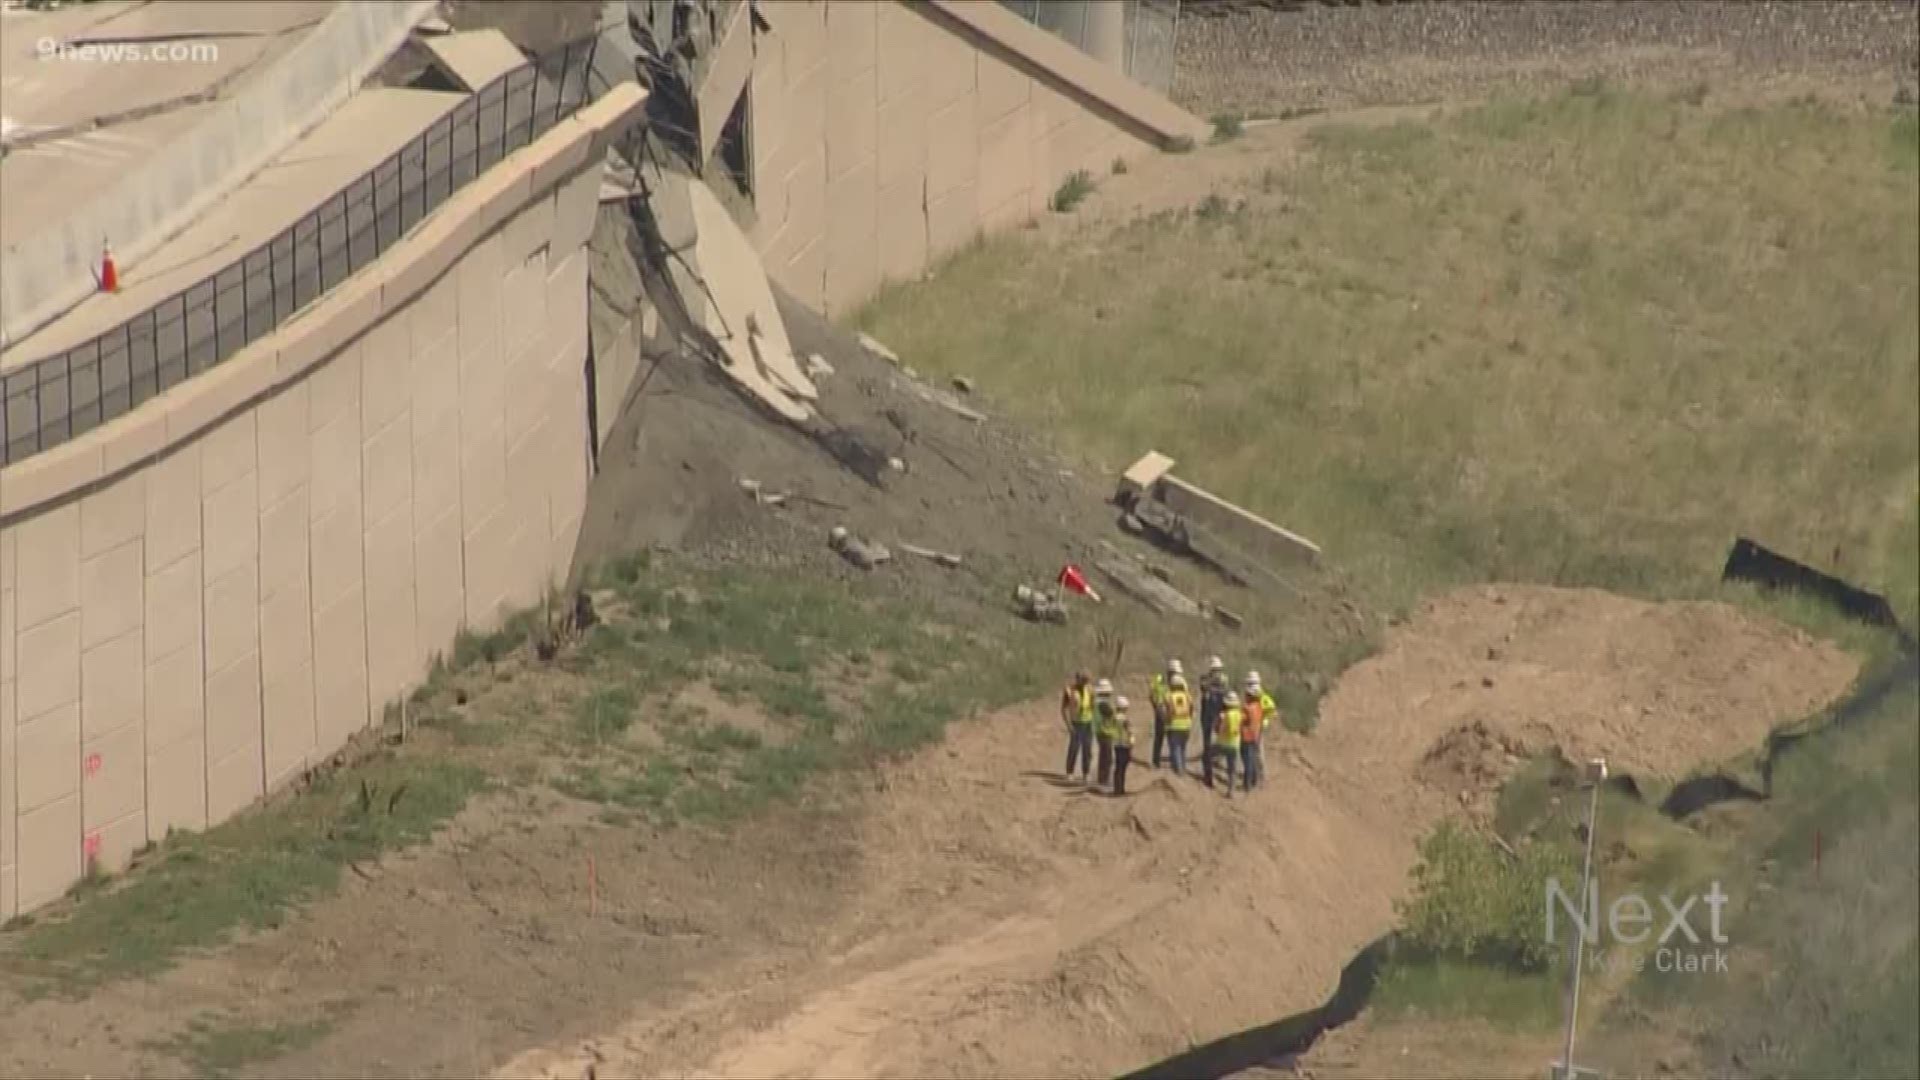 CDOT explains why it's not worried about the west side of US 36 collapsing like the east side did.